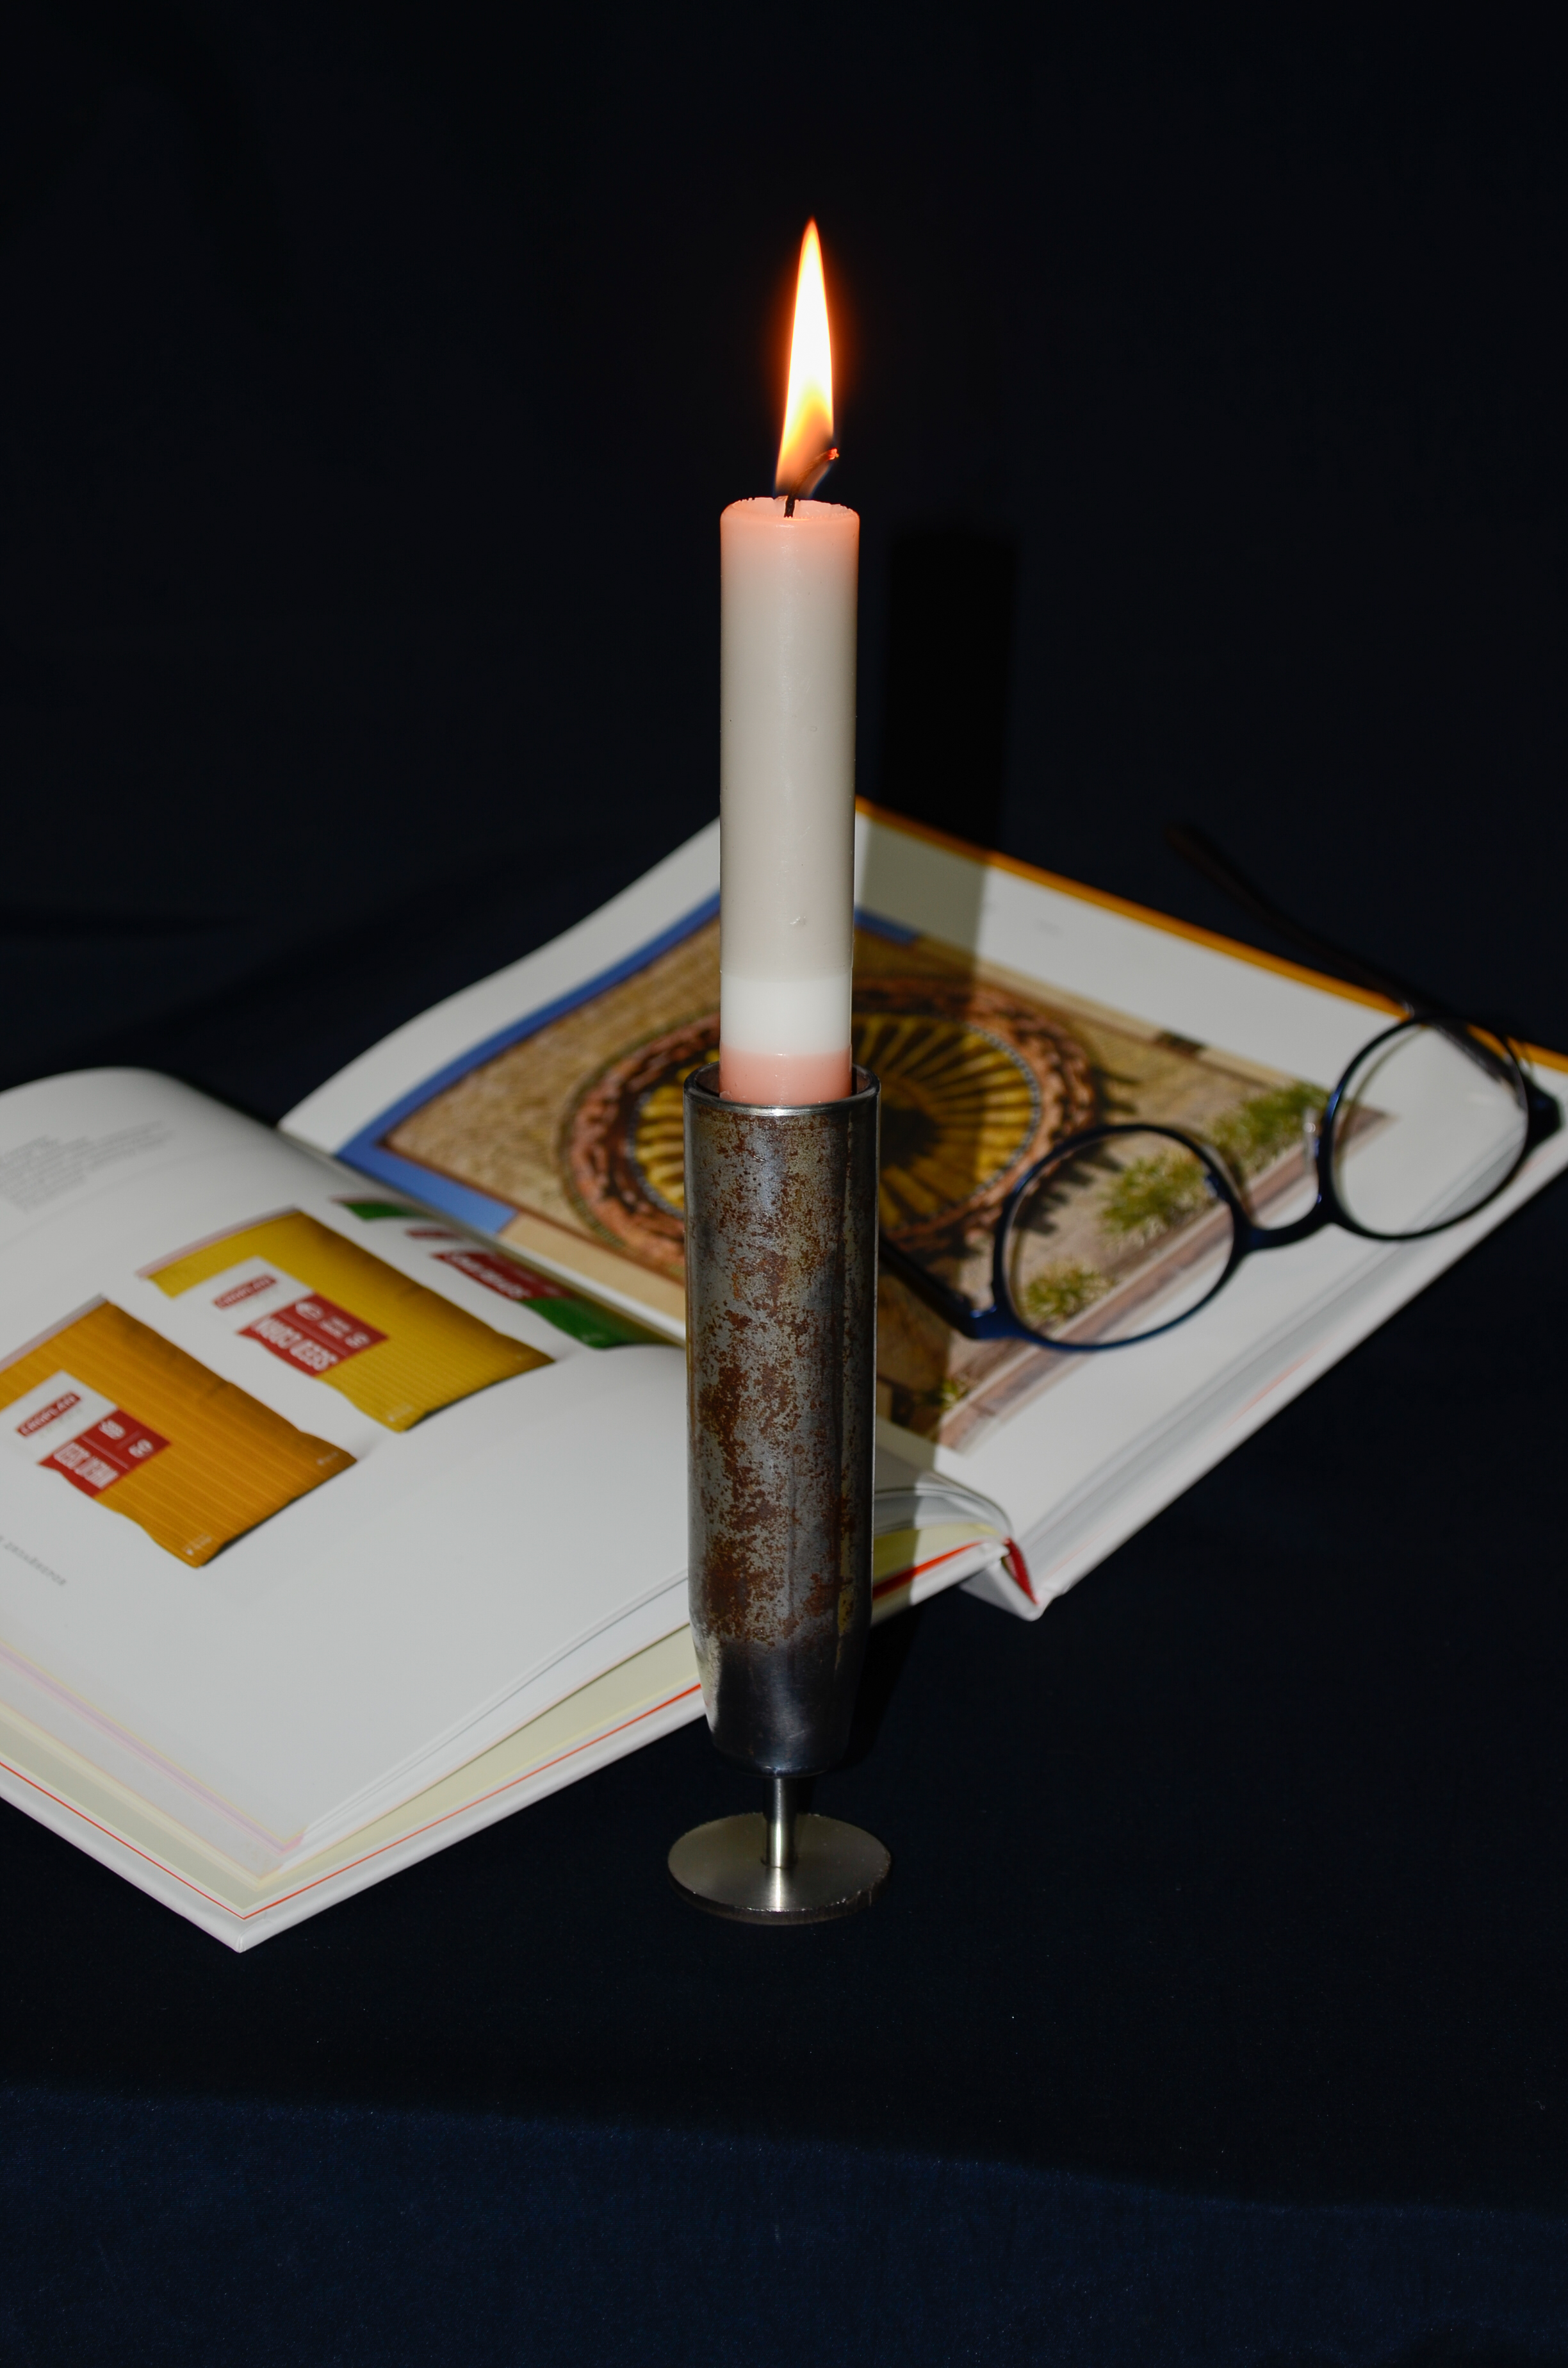 Candlestick is made from a shell casing